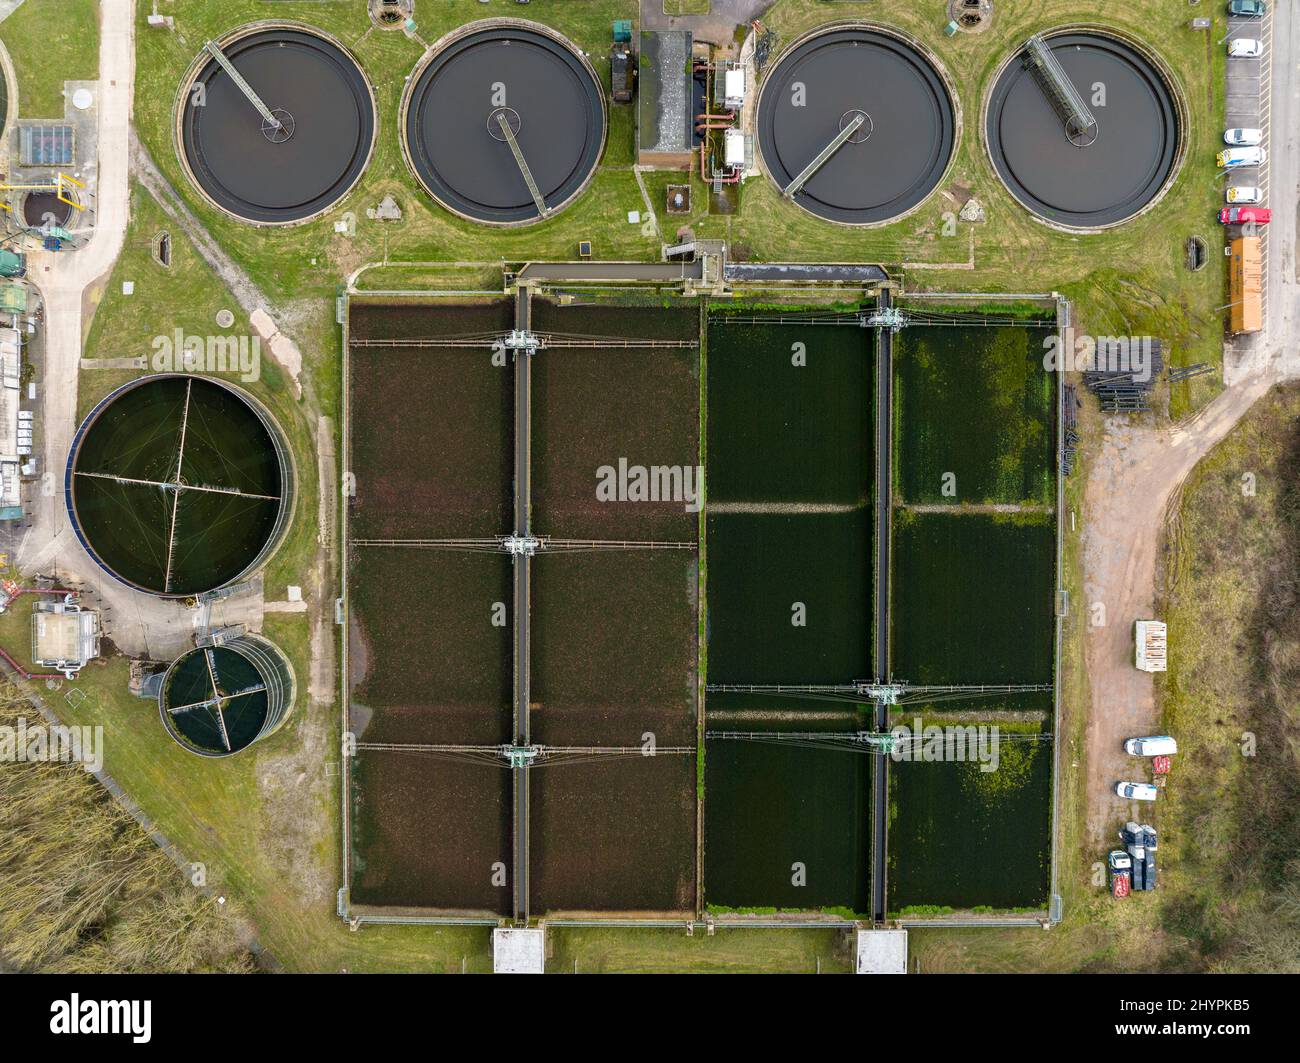 sewage and wastewater treatment facility (Btu Horsham Water Treatment Works) in Horsham West Sussex, UK, with settlement tanks and aeration lanes. Stock Photo